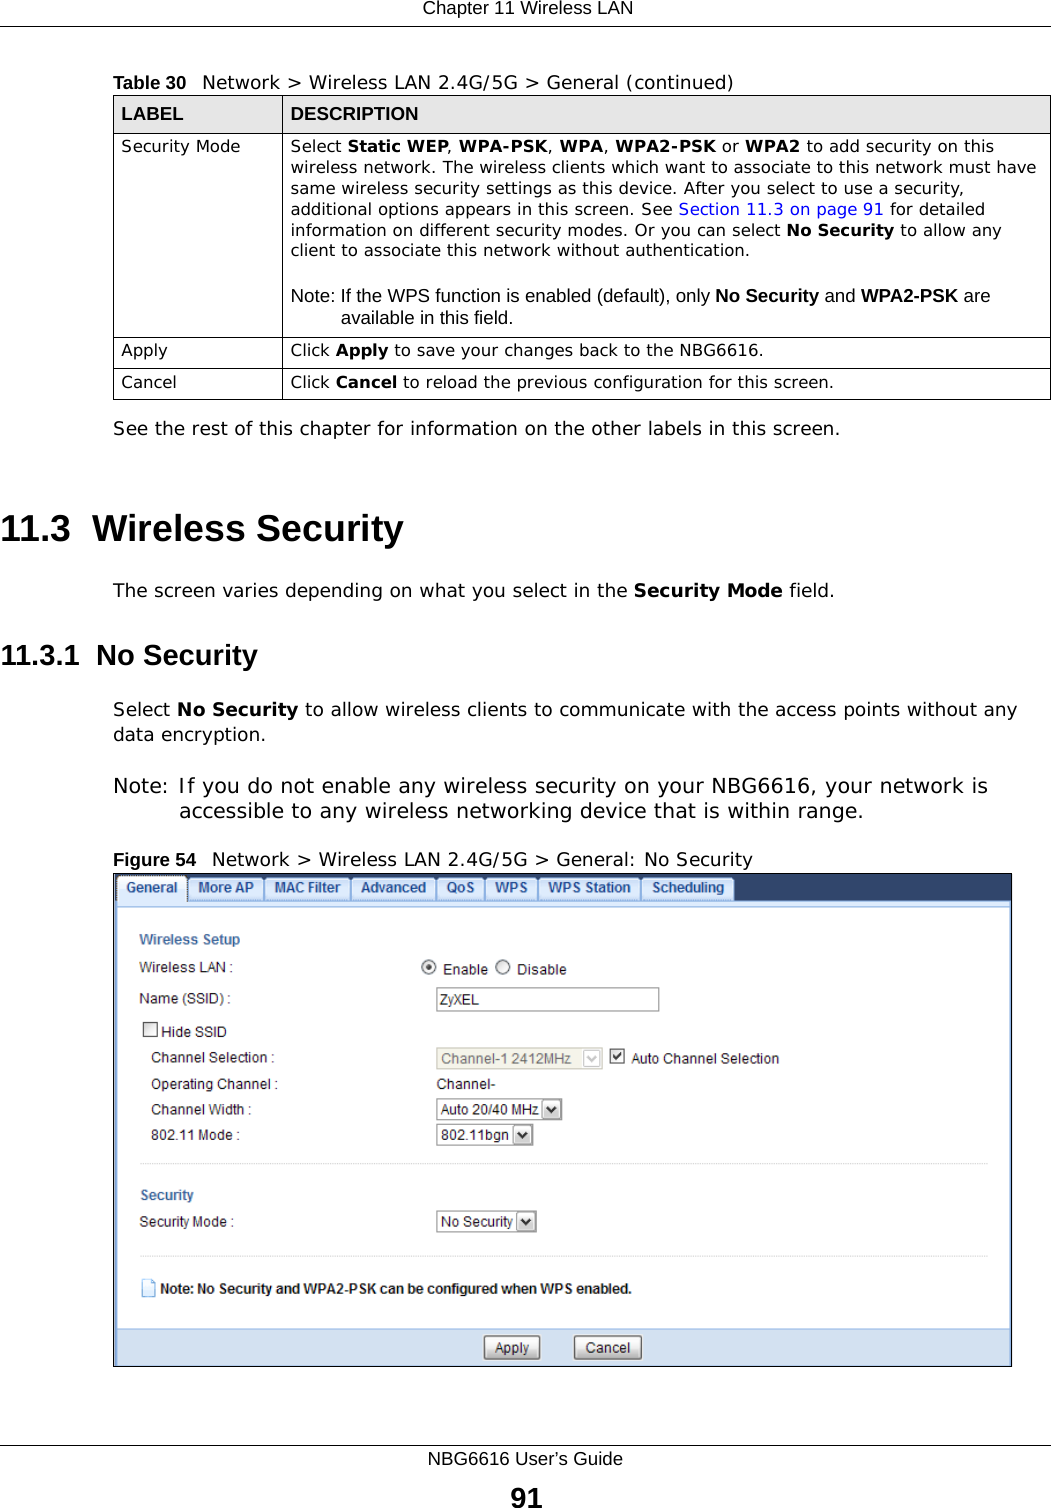  Chapter 11 Wireless LANNBG6616 User’s Guide91See the rest of this chapter for information on the other labels in this screen. 11.3  Wireless SecurityThe screen varies depending on what you select in the Security Mode field.11.3.1  No SecuritySelect No Security to allow wireless clients to communicate with the access points without any data encryption.Note: If you do not enable any wireless security on your NBG6616, your network is accessible to any wireless networking device that is within range.Figure 54   Network &gt; Wireless LAN 2.4G/5G &gt; General: No SecuritySecurity Mode Select Static WEP, WPA-PSK, WPA, WPA2-PSK or WPA2 to add security on this wireless network. The wireless clients which want to associate to this network must have same wireless security settings as this device. After you select to use a security, additional options appears in this screen. See Section 11.3 on page 91 for detailed information on different security modes. Or you can select No Security to allow any client to associate this network without authentication.Note: If the WPS function is enabled (default), only No Security and WPA2-PSK are available in this field.Apply Click Apply to save your changes back to the NBG6616.Cancel Click Cancel to reload the previous configuration for this screen.Table 30   Network &gt; Wireless LAN 2.4G/5G &gt; General (continued)LABEL DESCRIPTION